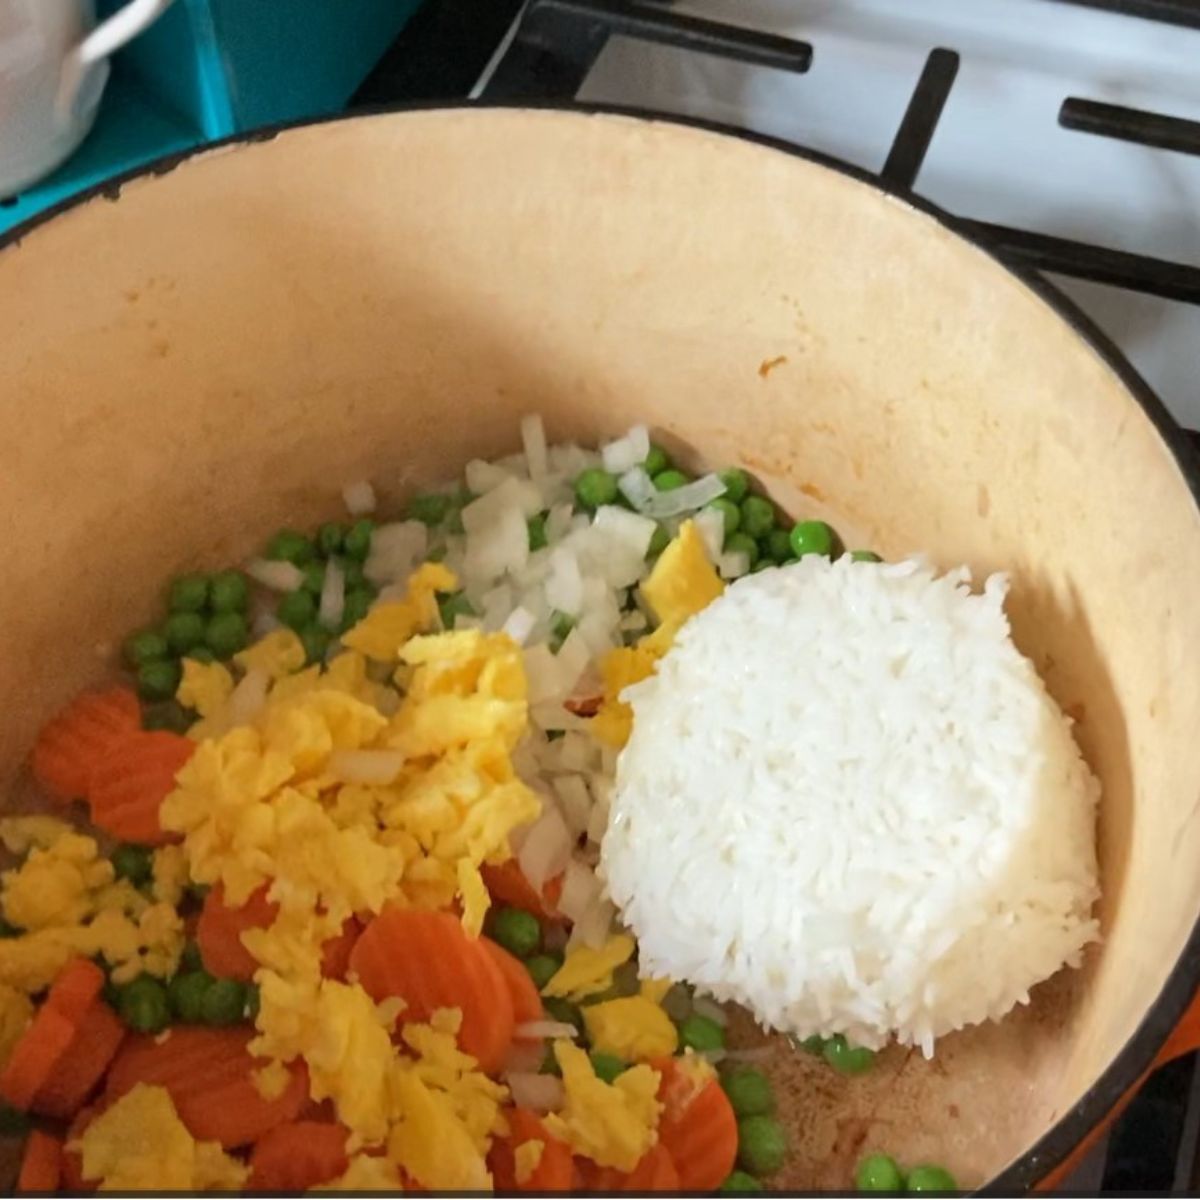 Fried rice recipe, step 3 - add everything to a pot